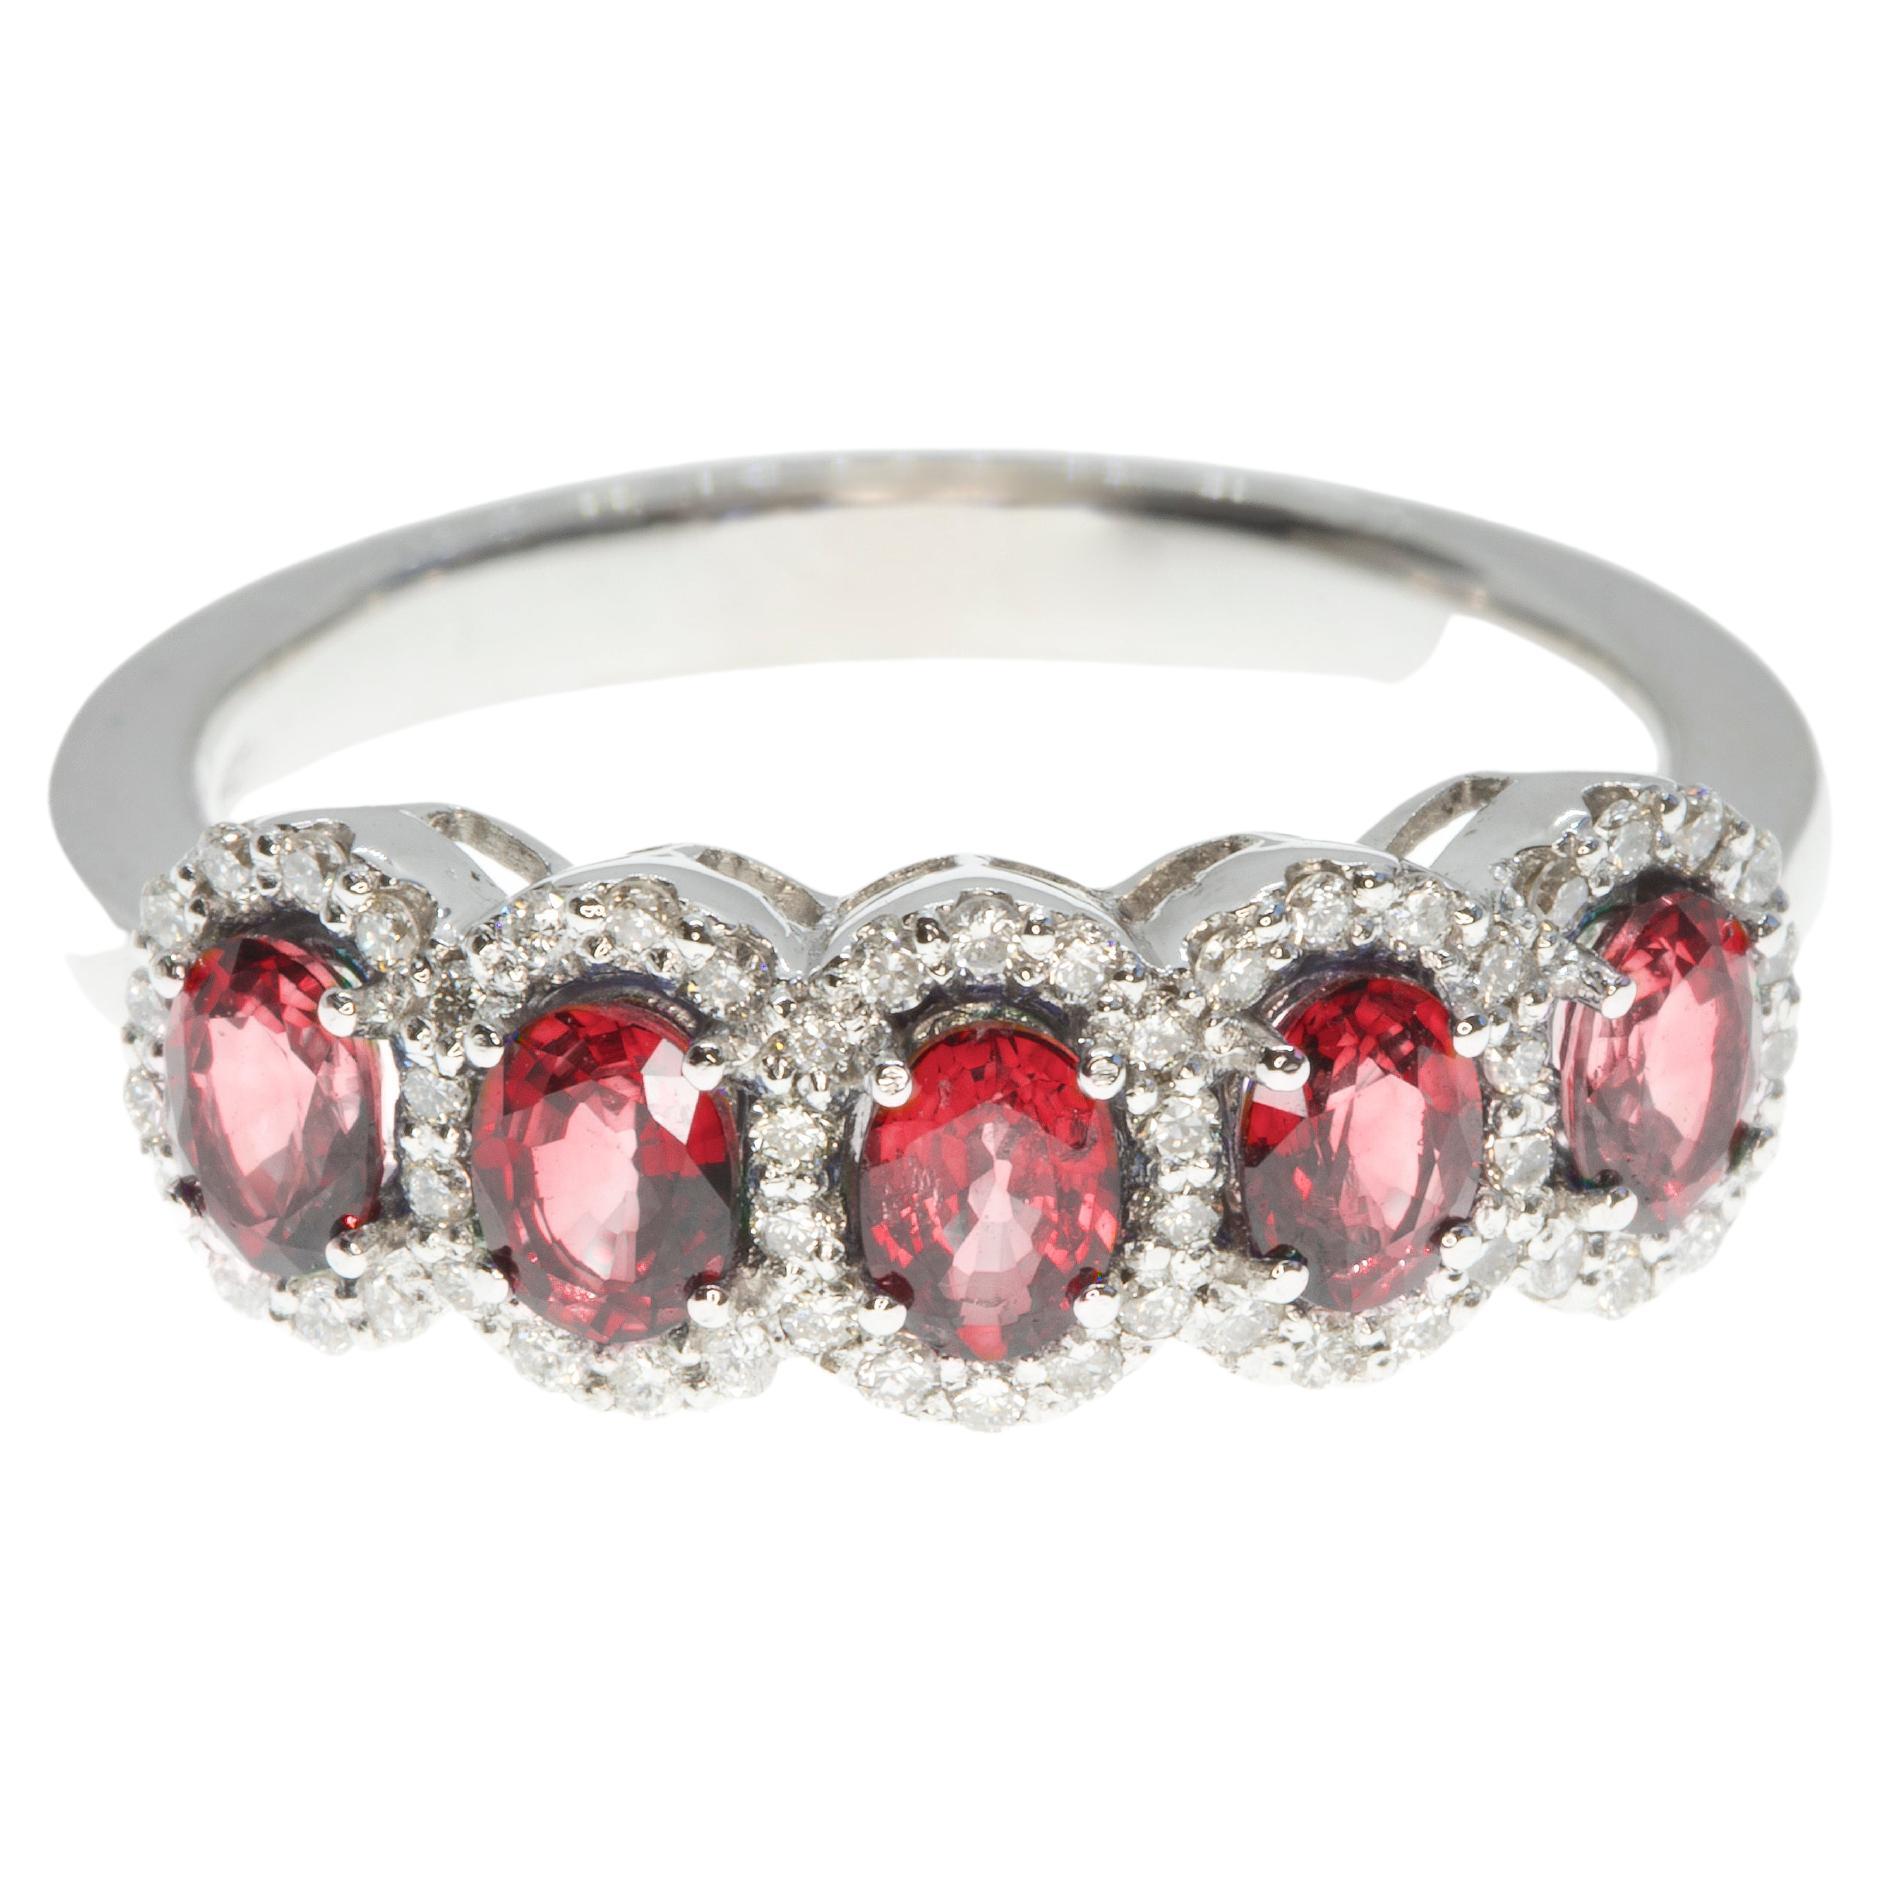 21st Century 18 Karat White Gold Diamond and Ruby Cocktail or Anniversary Ring For Sale